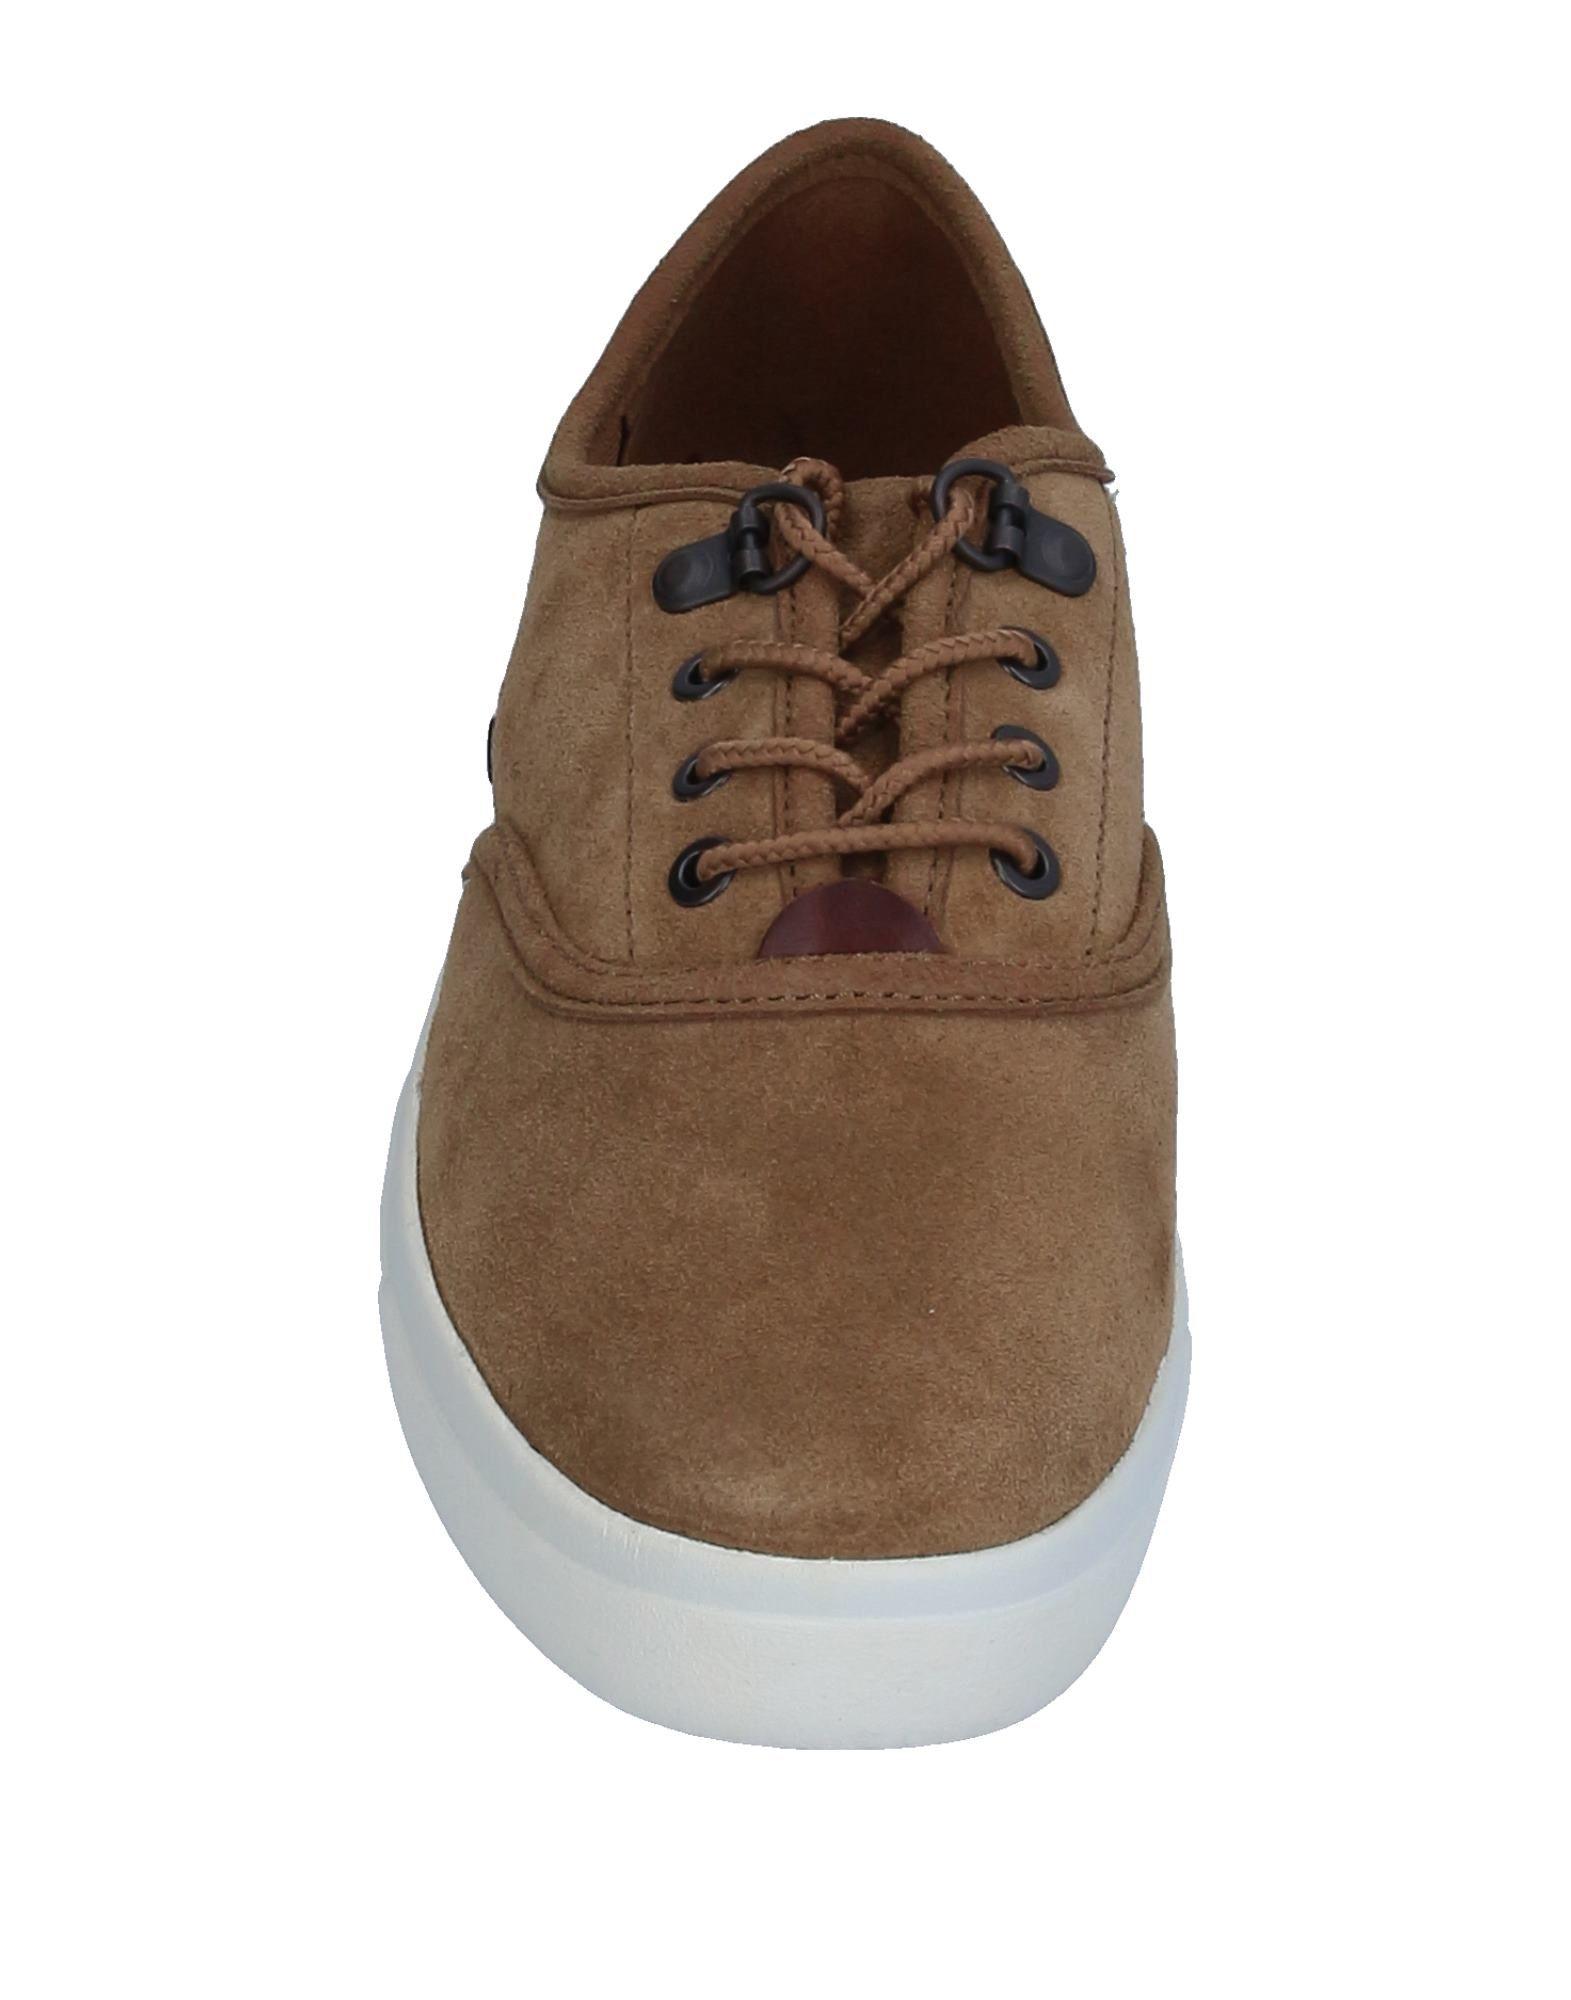 Timberland Leather Low-tops & Sneakers in Khaki (Brown) - Lyst